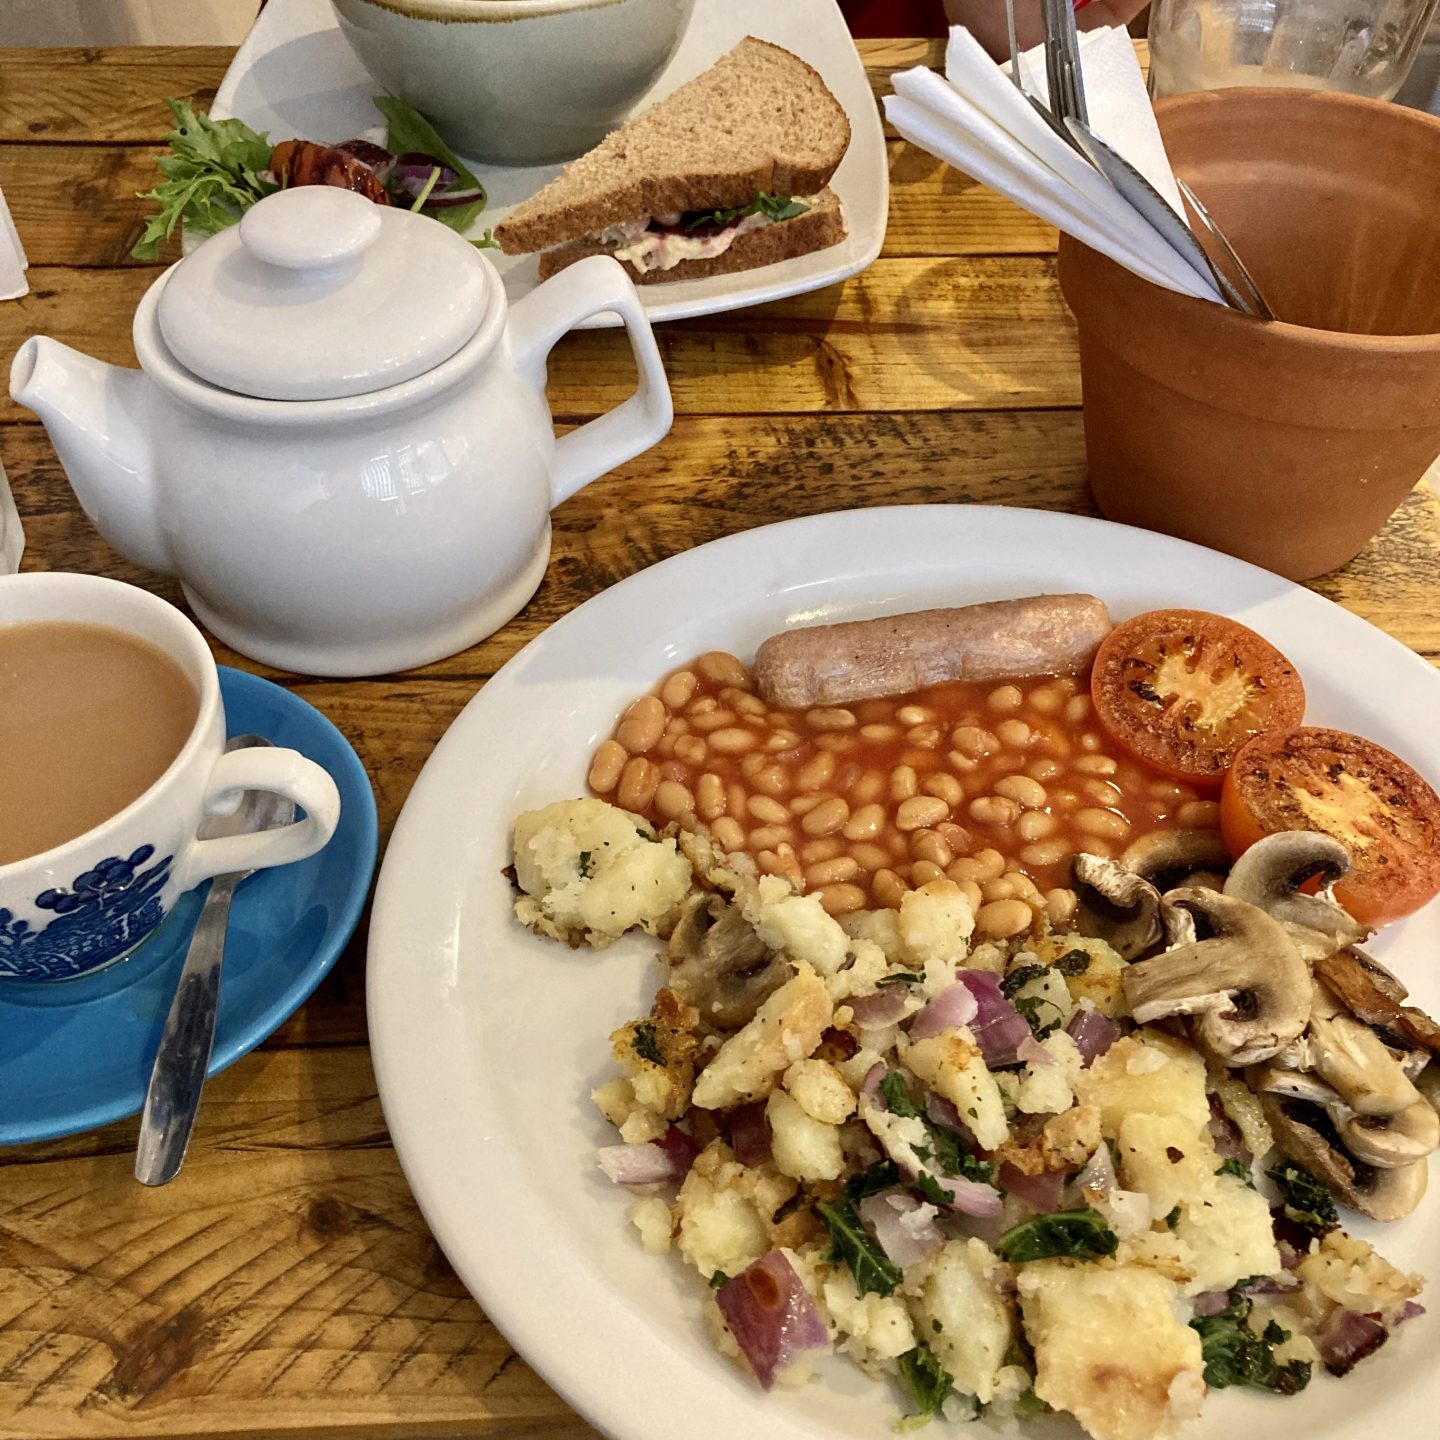 vegan full english in bruks cafe, featuring beans and bubble and squeak. cutlery in the background is stored in a cute plant pot